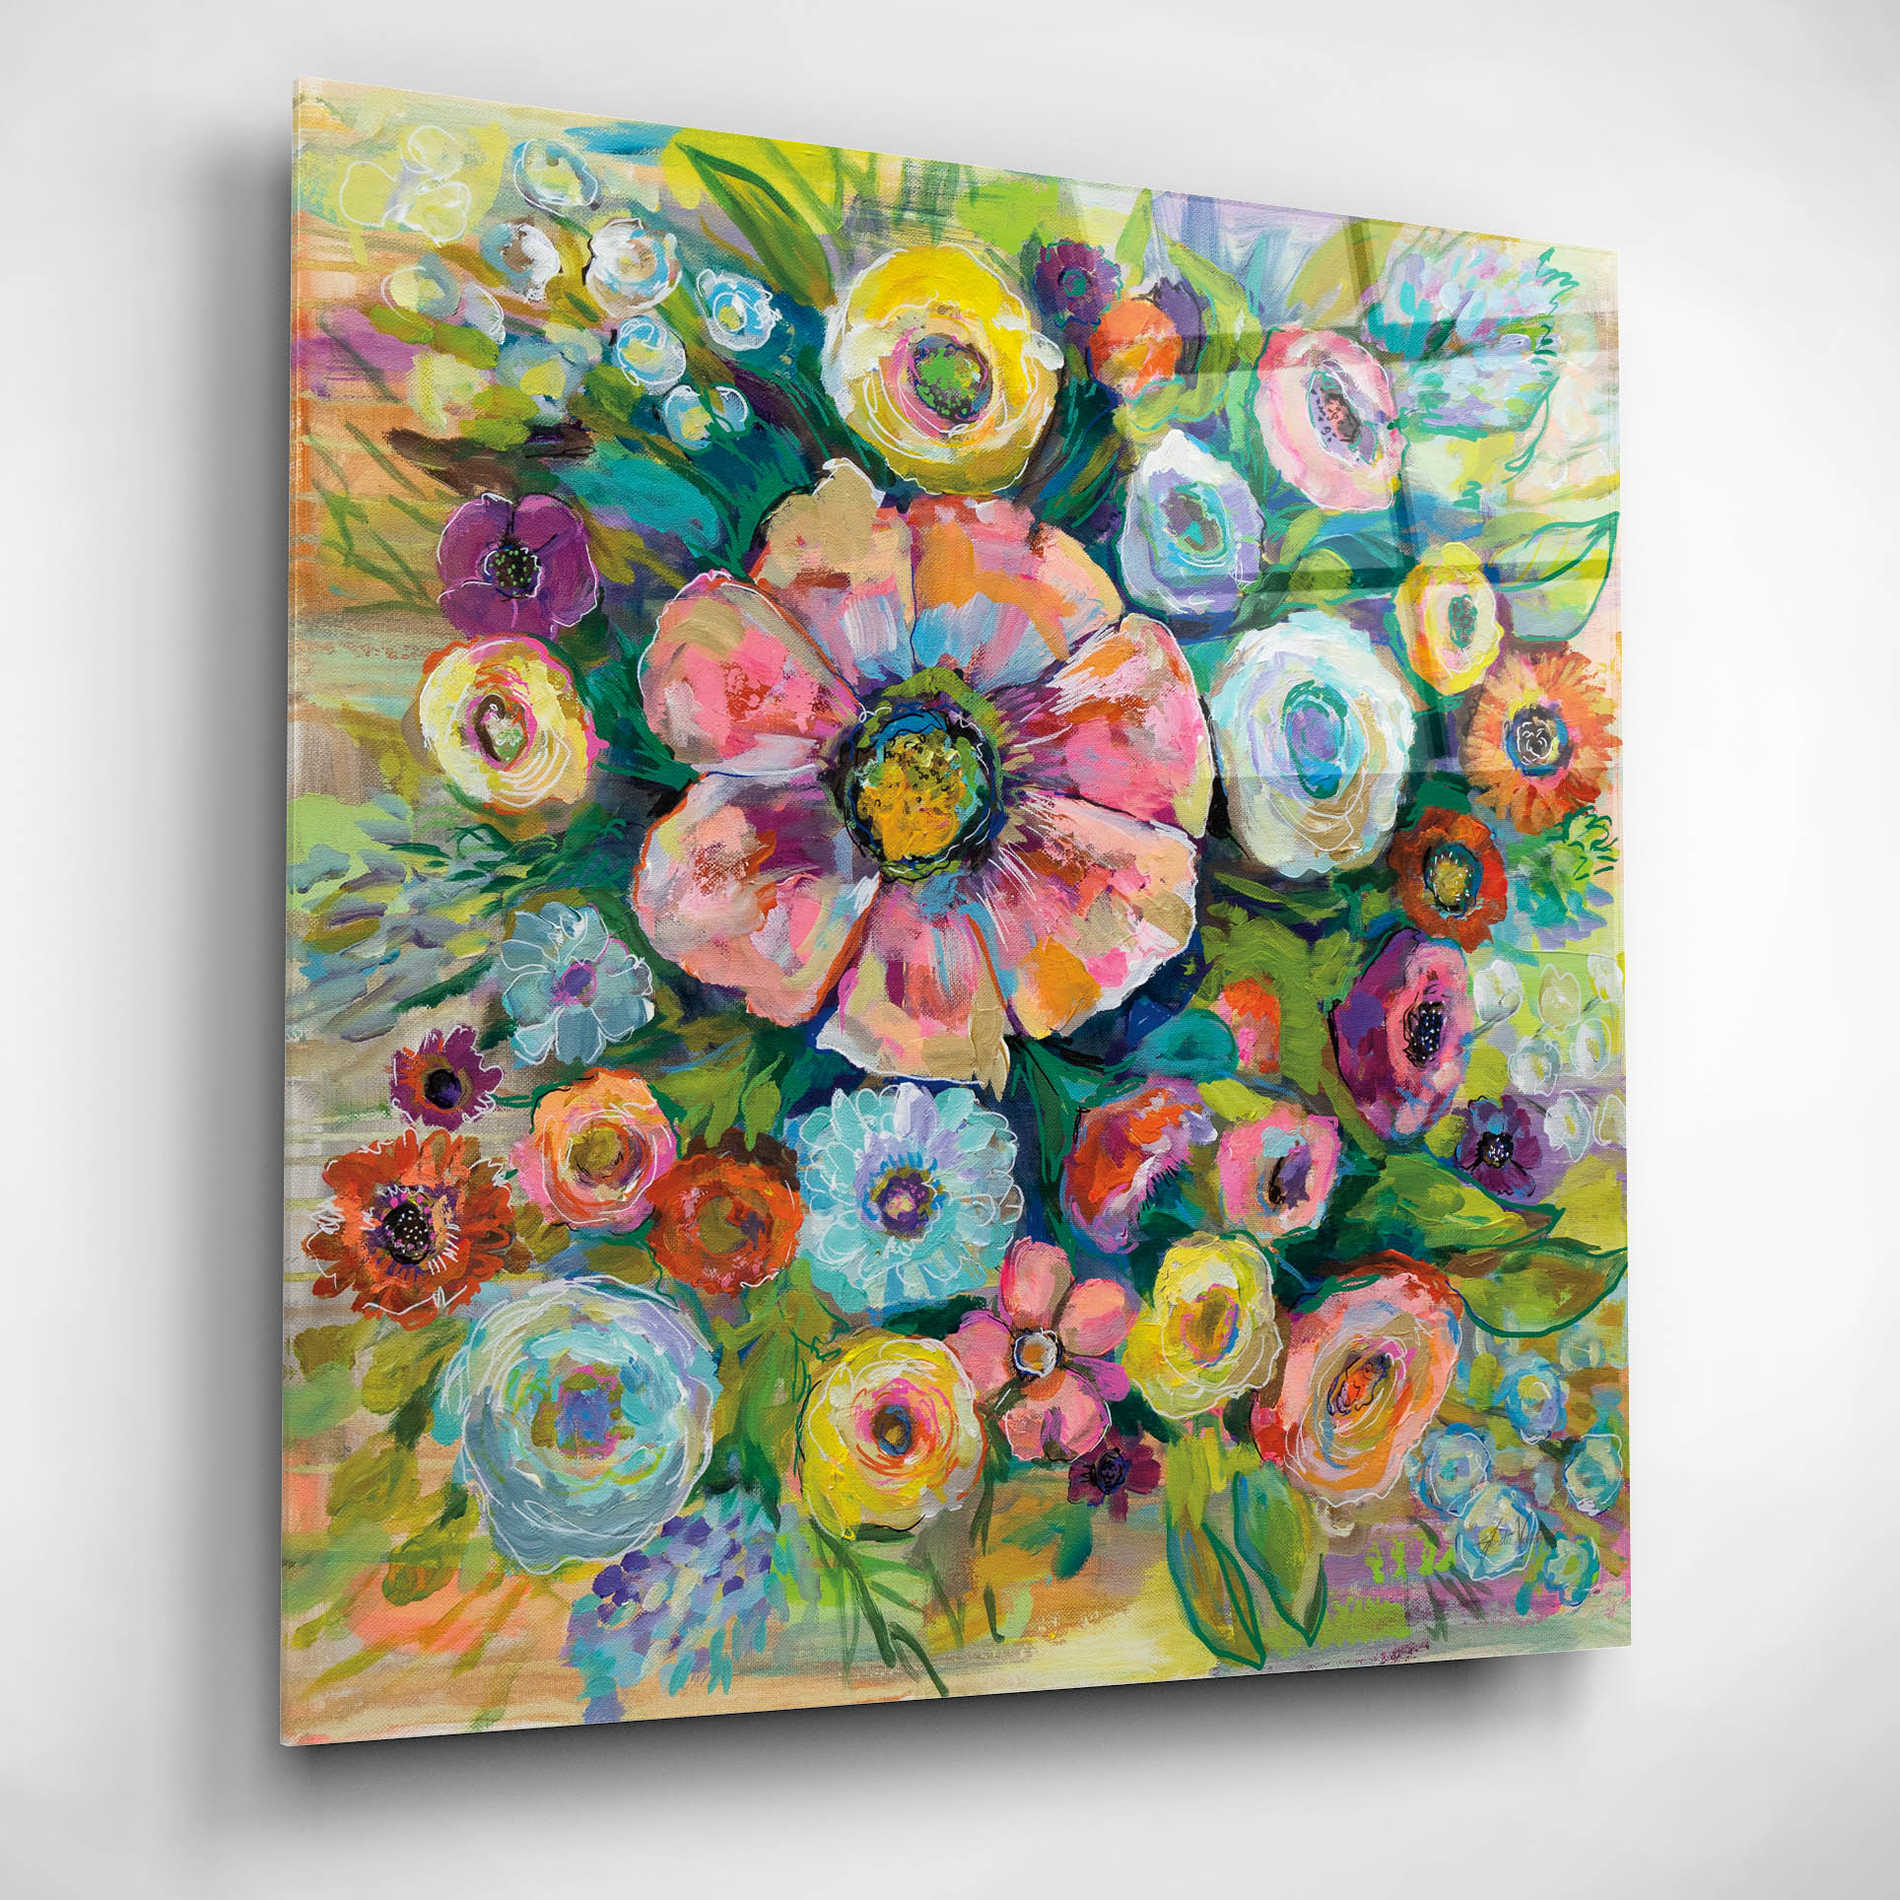 Epic Art 'Floral Fireworks' by Jeanette Vertentes, Acrylic Glass Wall Art,12x12